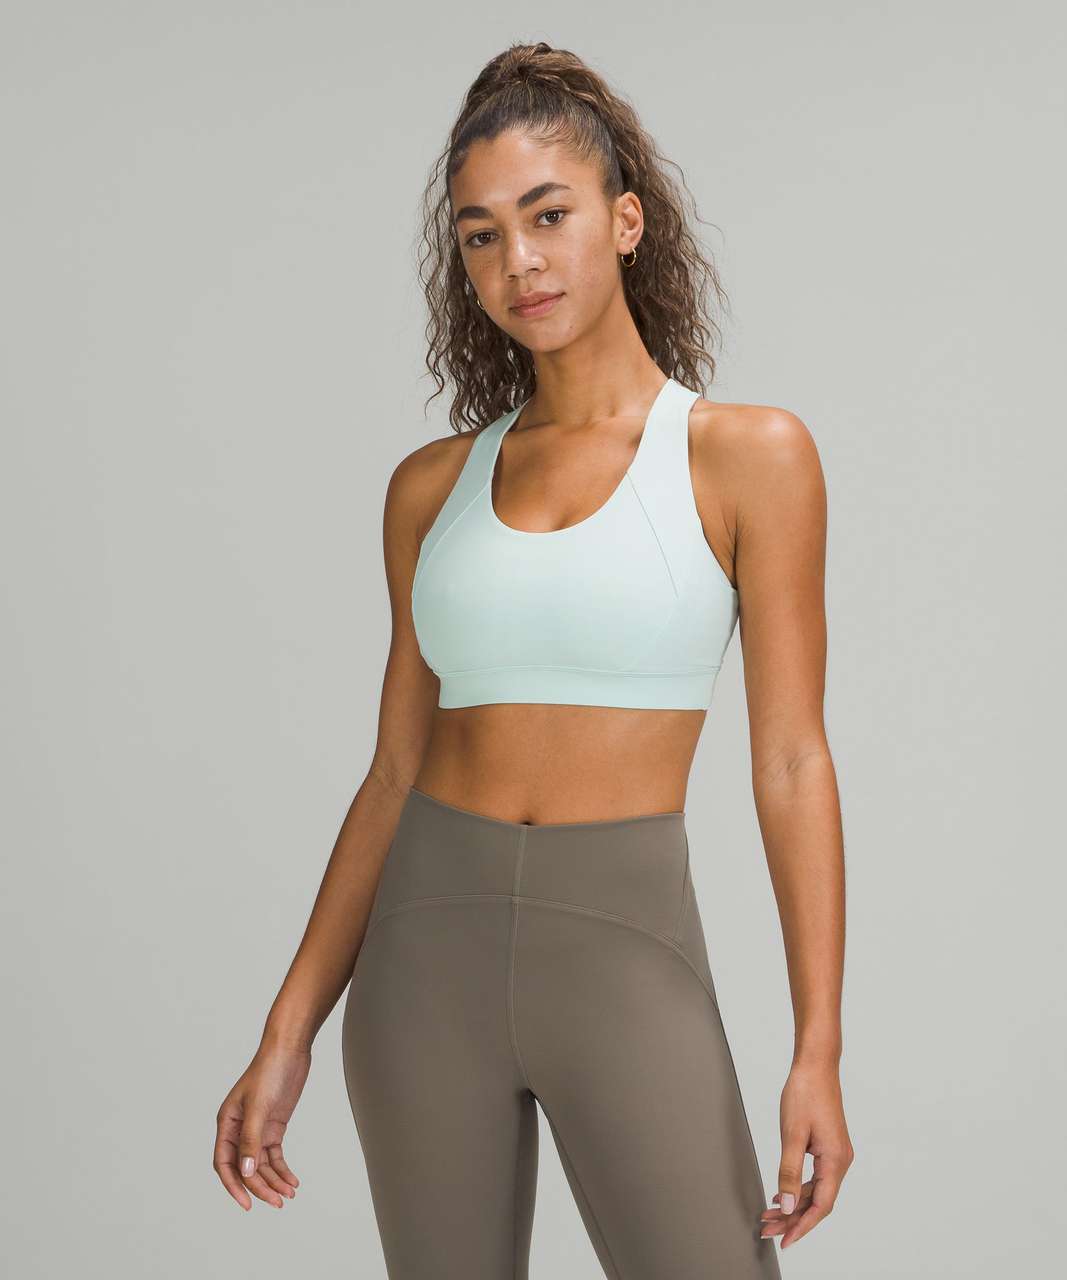 Lululemon Free to Be Elevated Bra *Light Support, DD/DDD(E) Cup - Delicate Mint